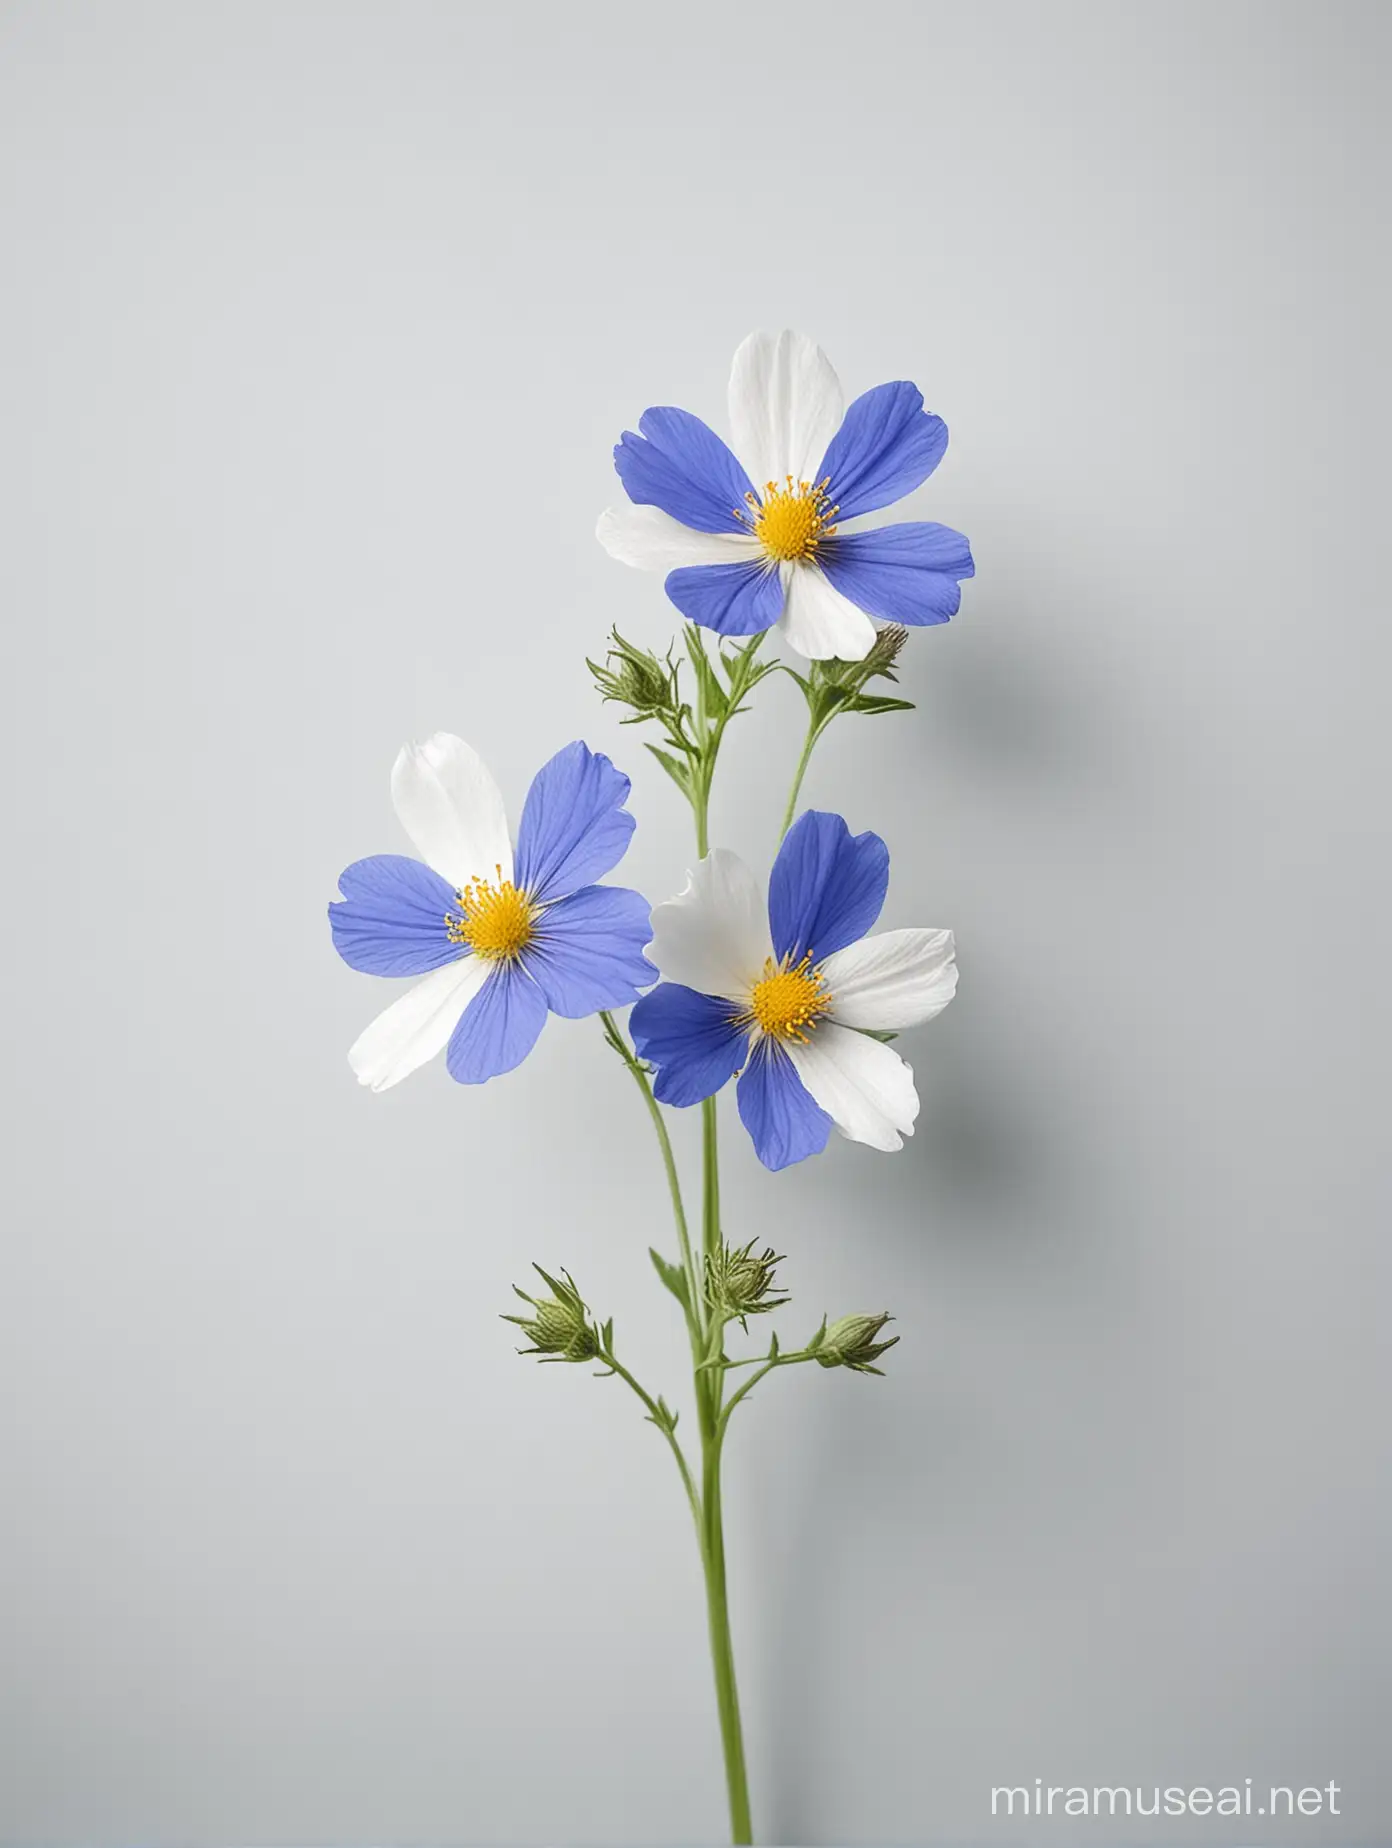 Vibrant Wild Flowers Blossoming Against a Serene Blue and White Backdrop